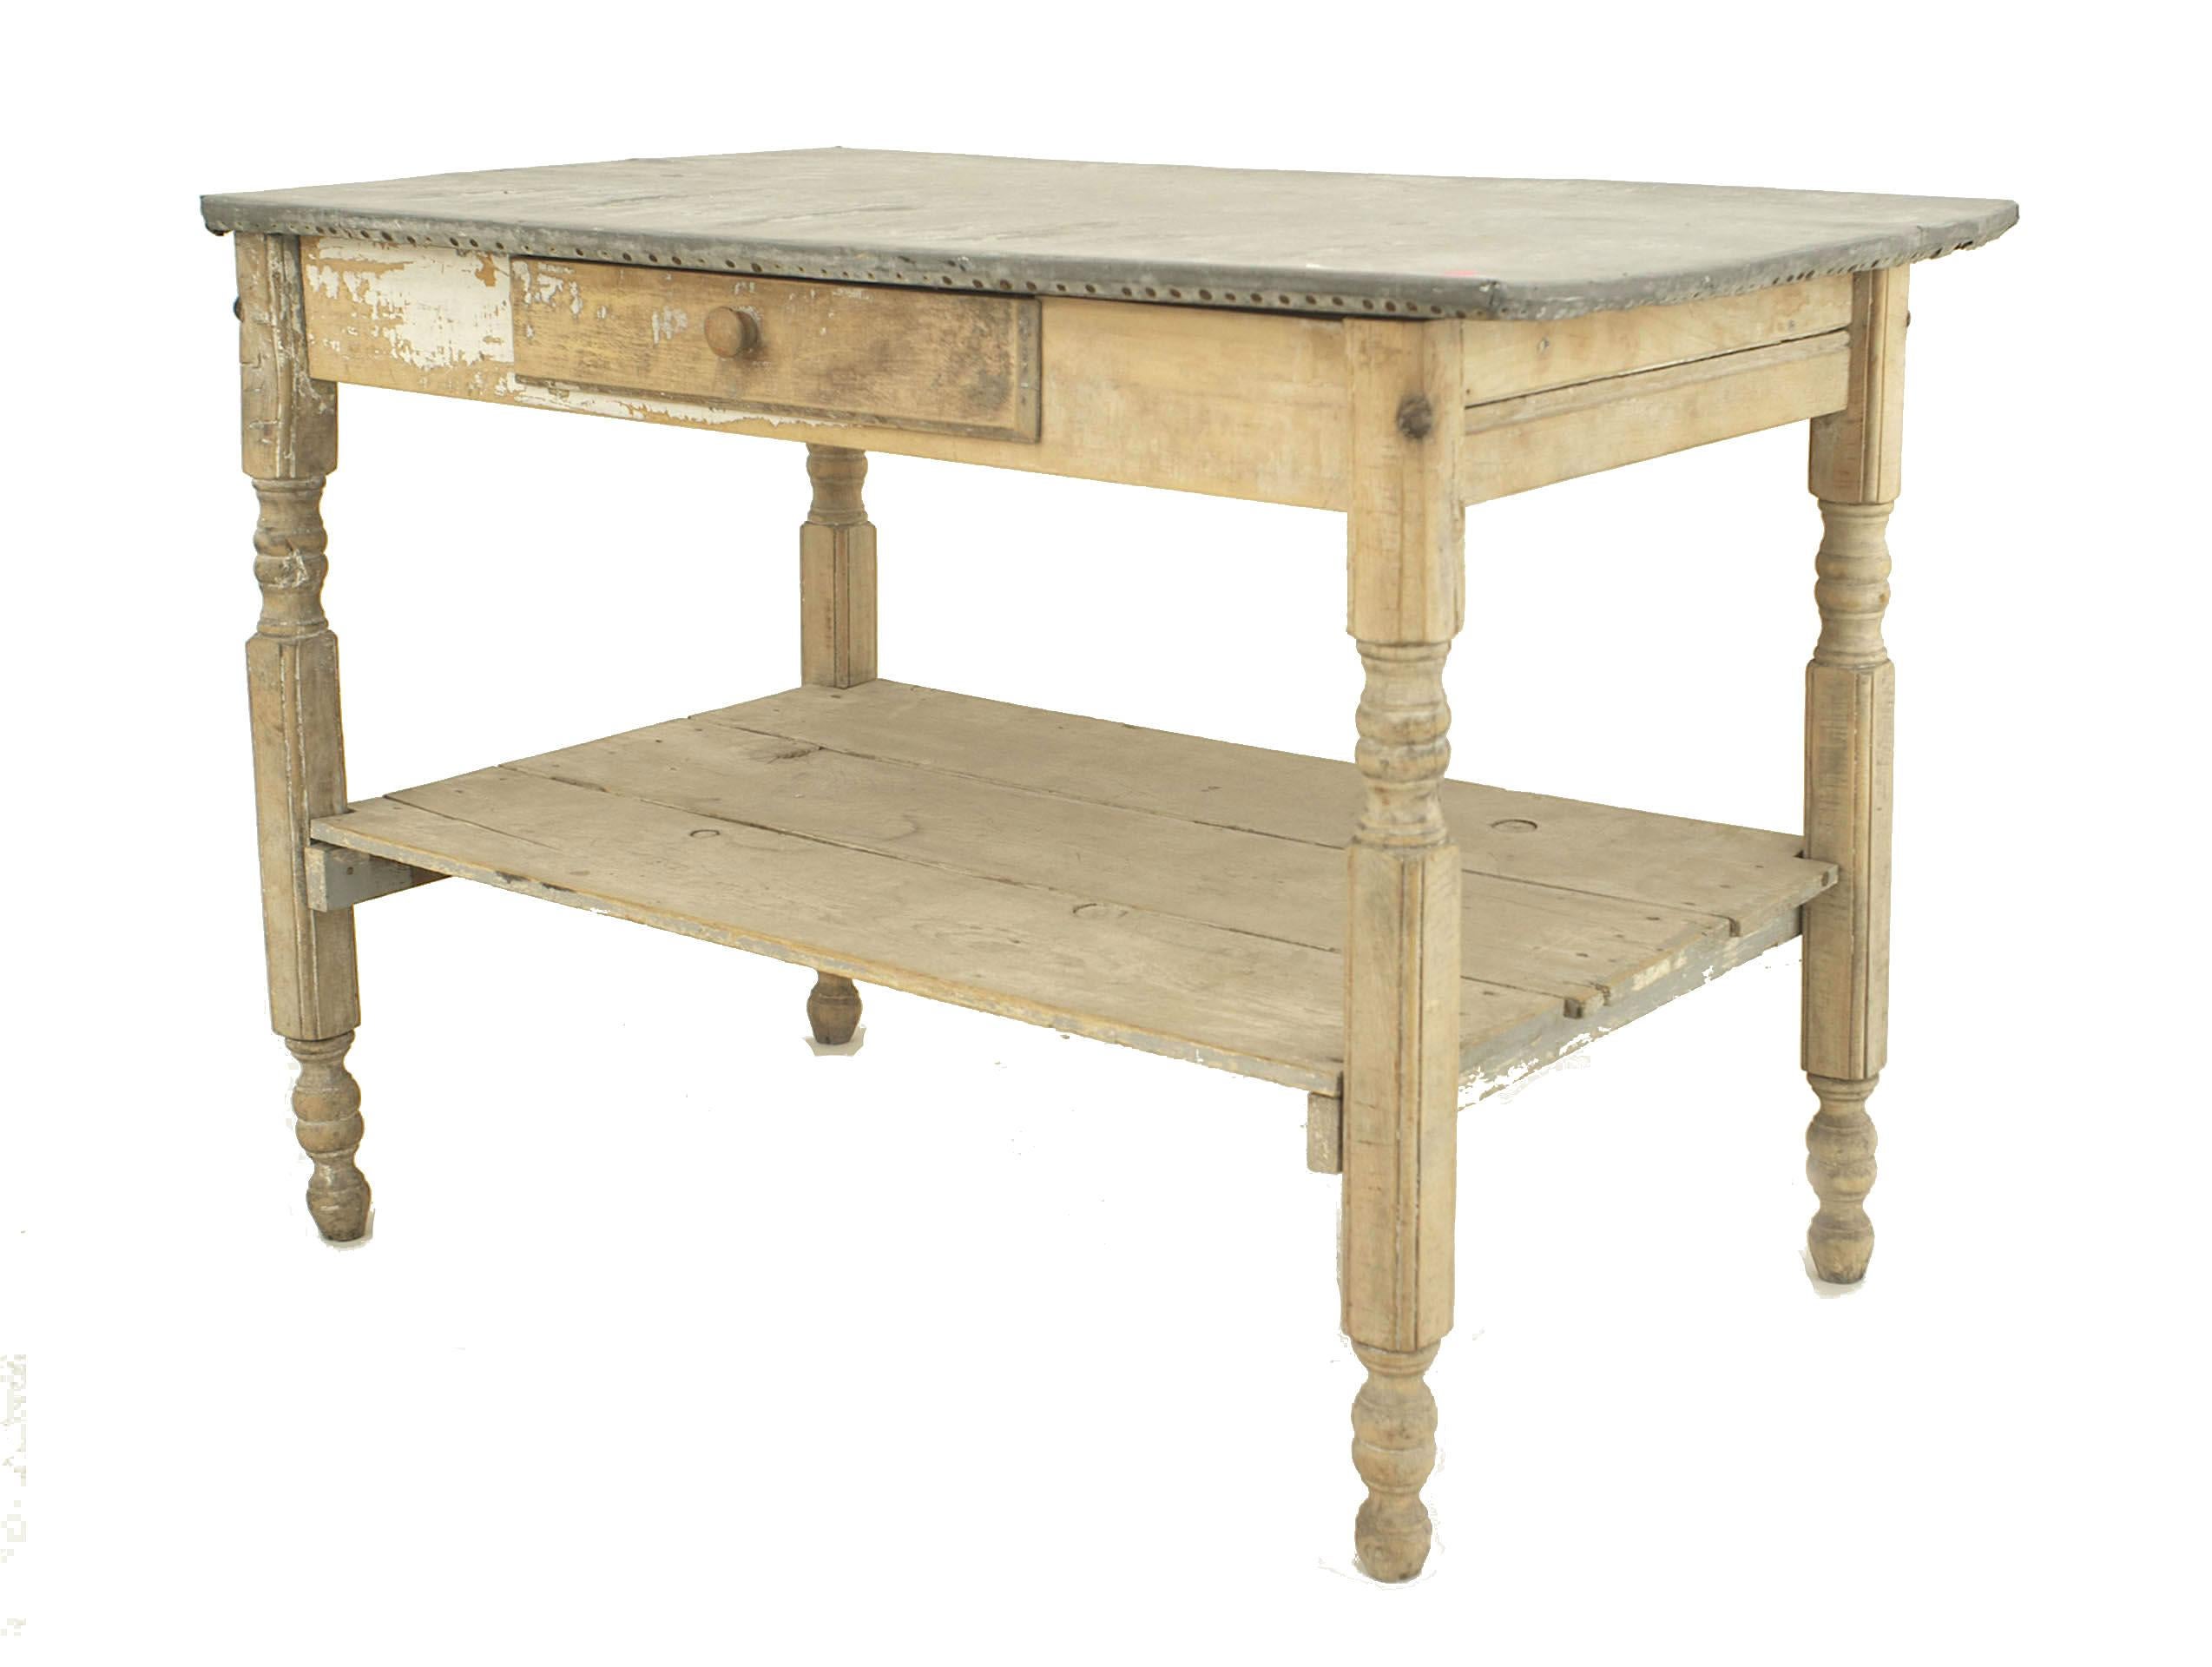 American Country Rustic style (19th Century) rectangular stripped antique weathered work table with a zinc top and a shelf stretcher.
